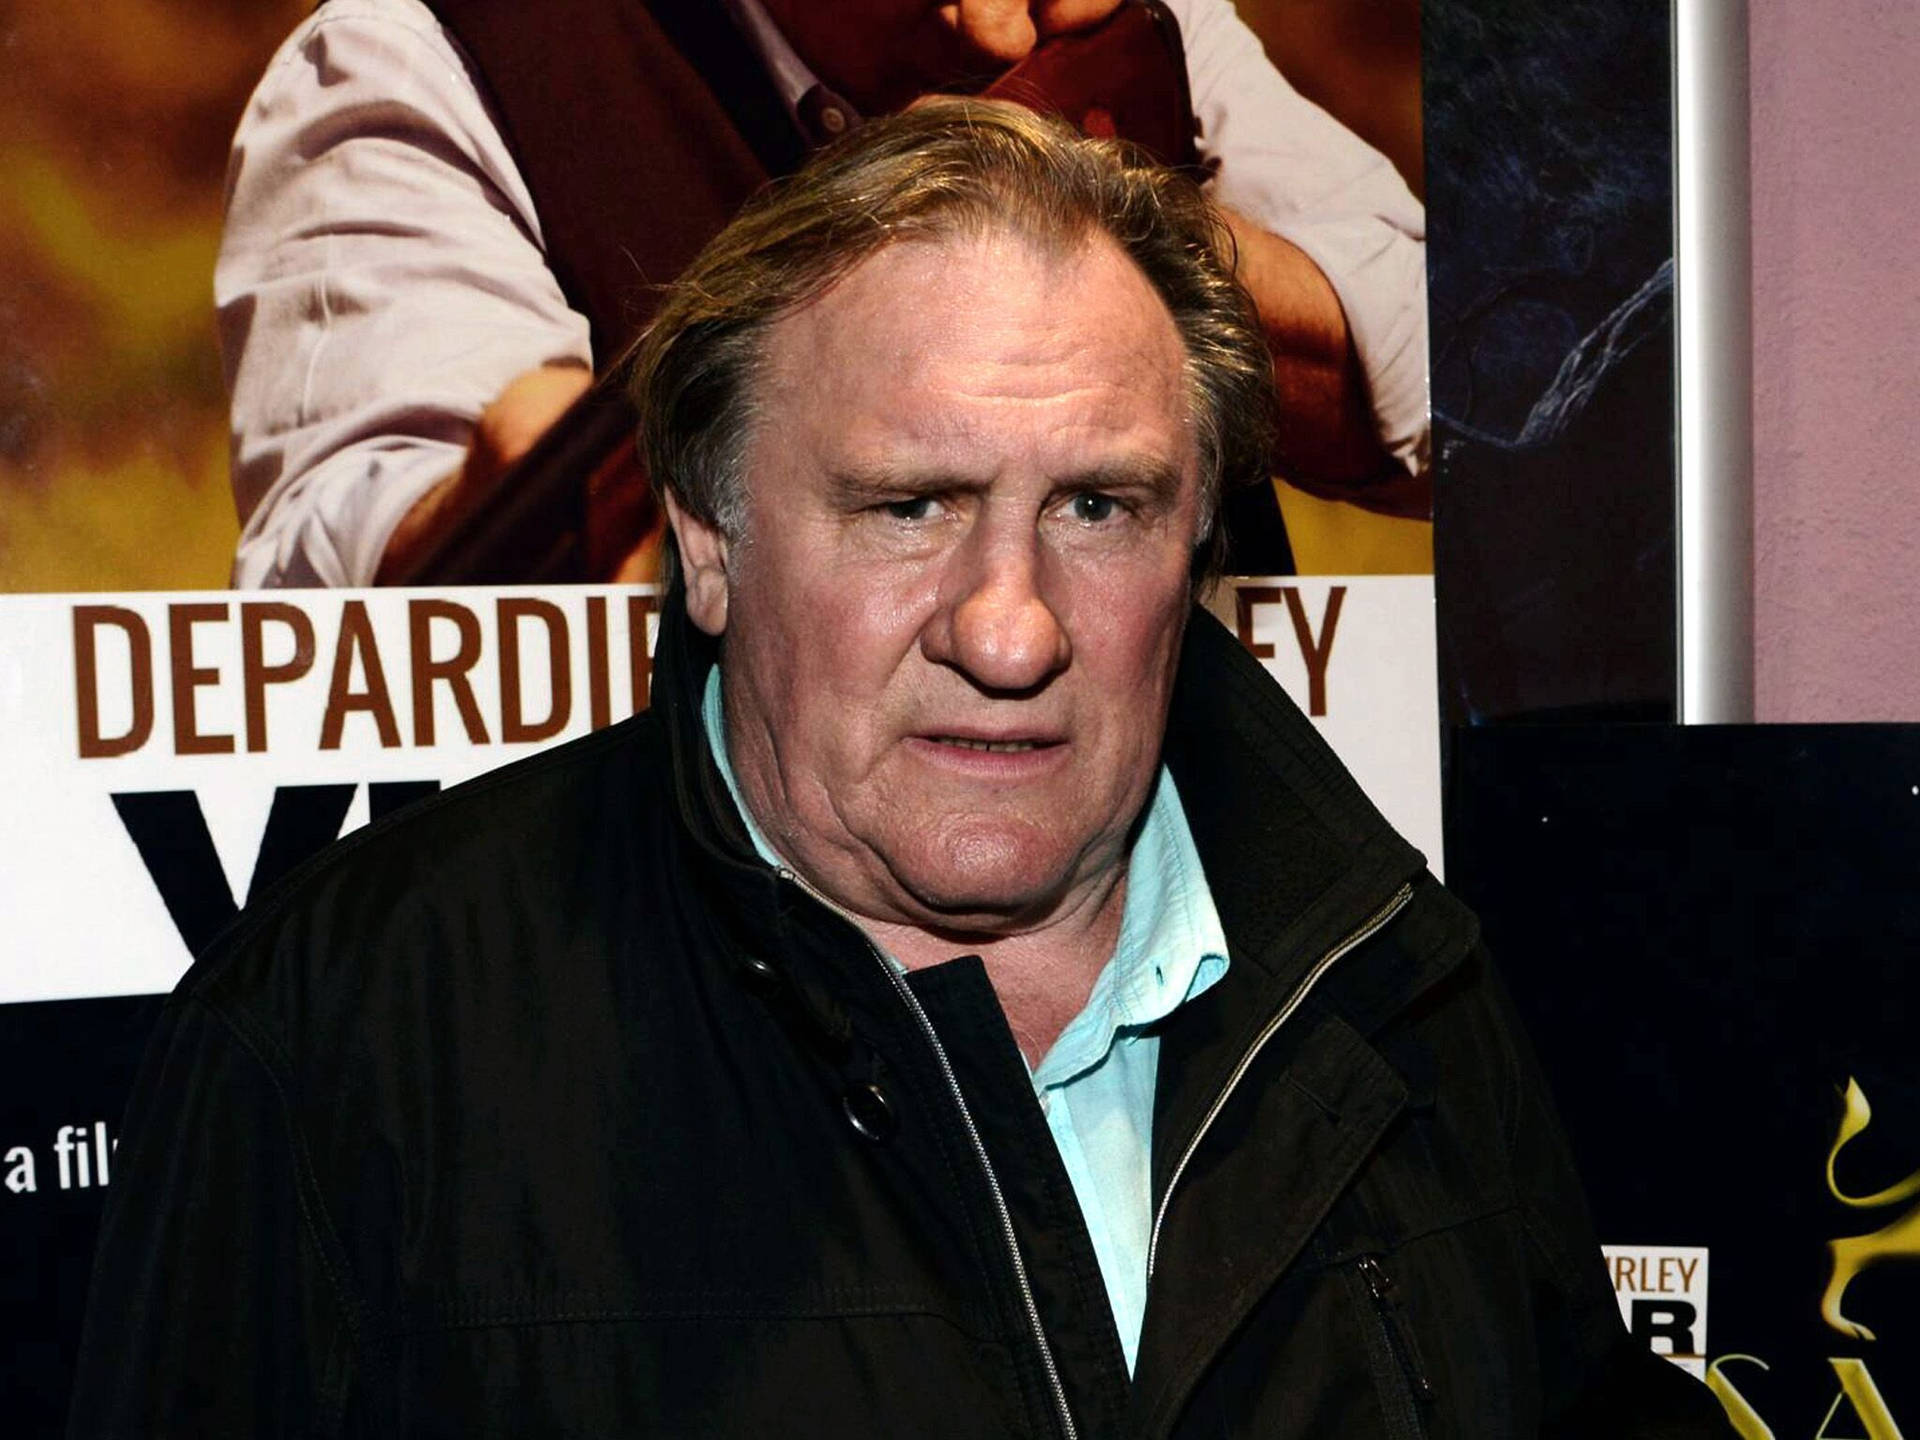 Captivating Gerard Depardieu in Iconic Movie Poster Wallpaper